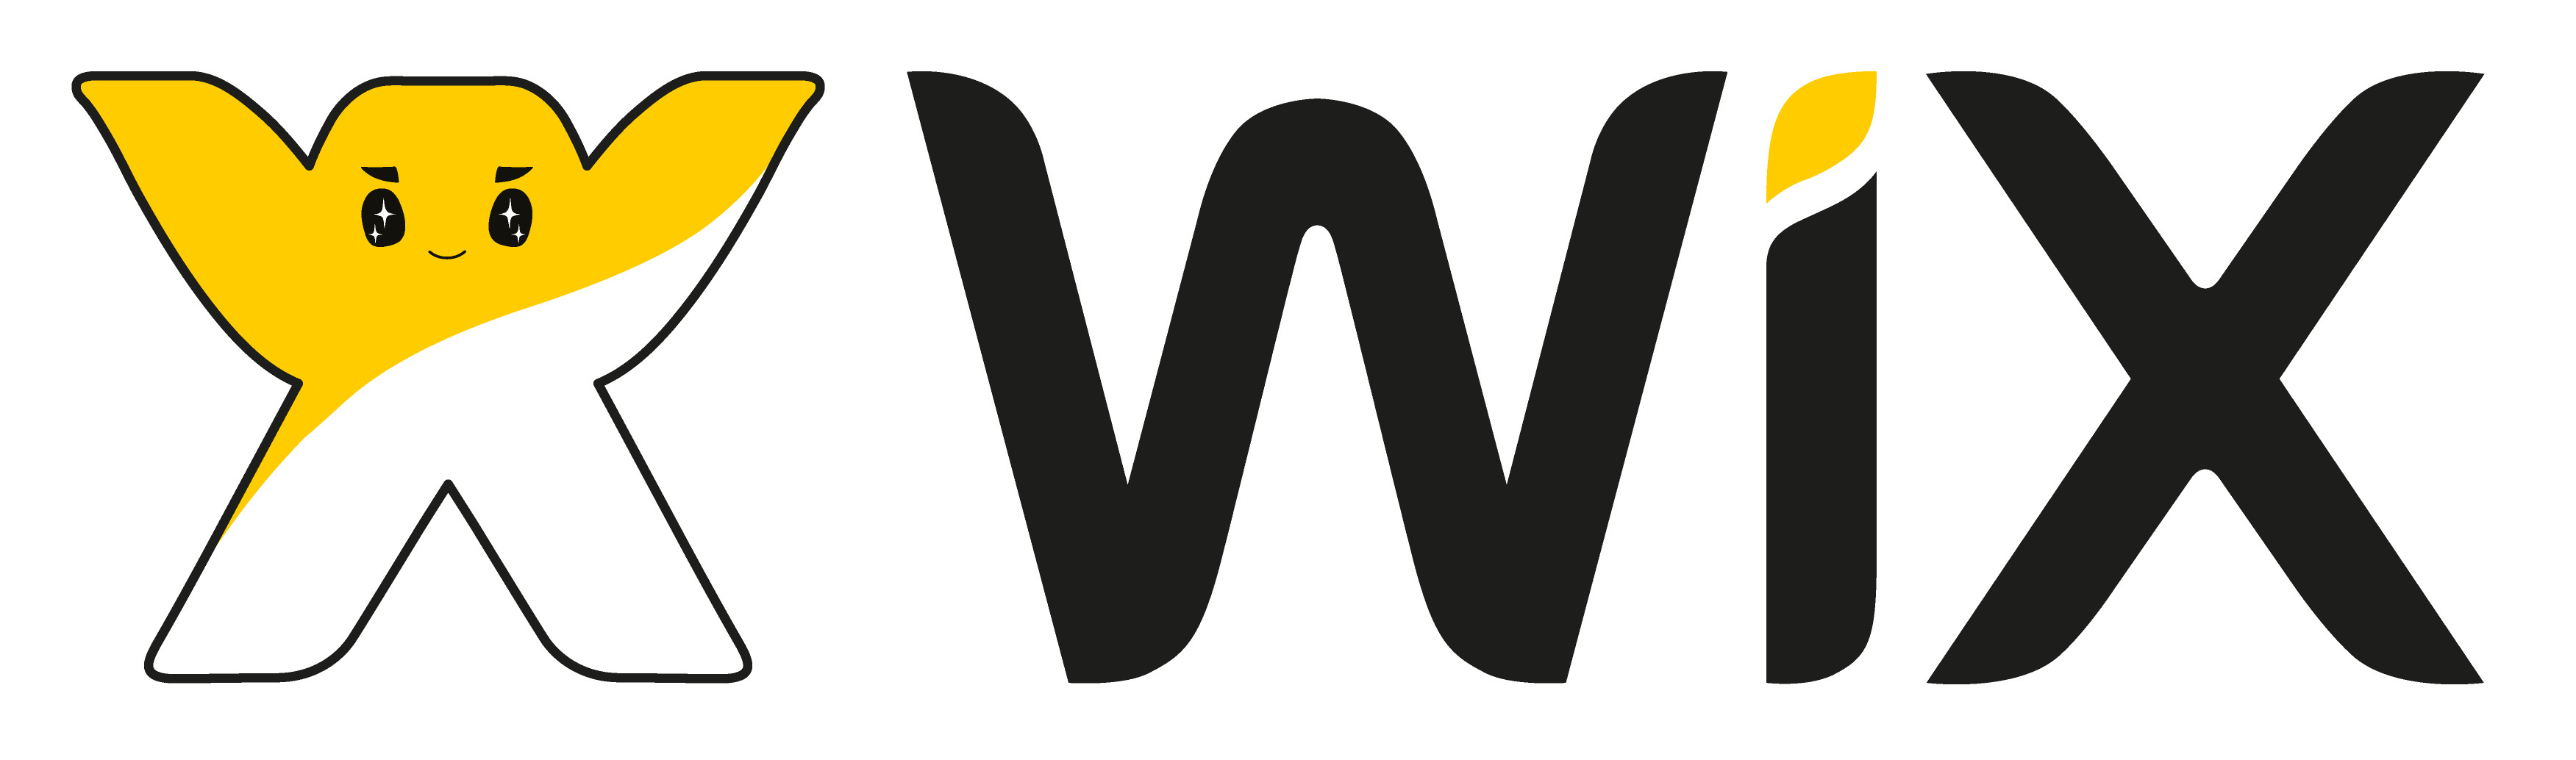 Wix.com Launches New